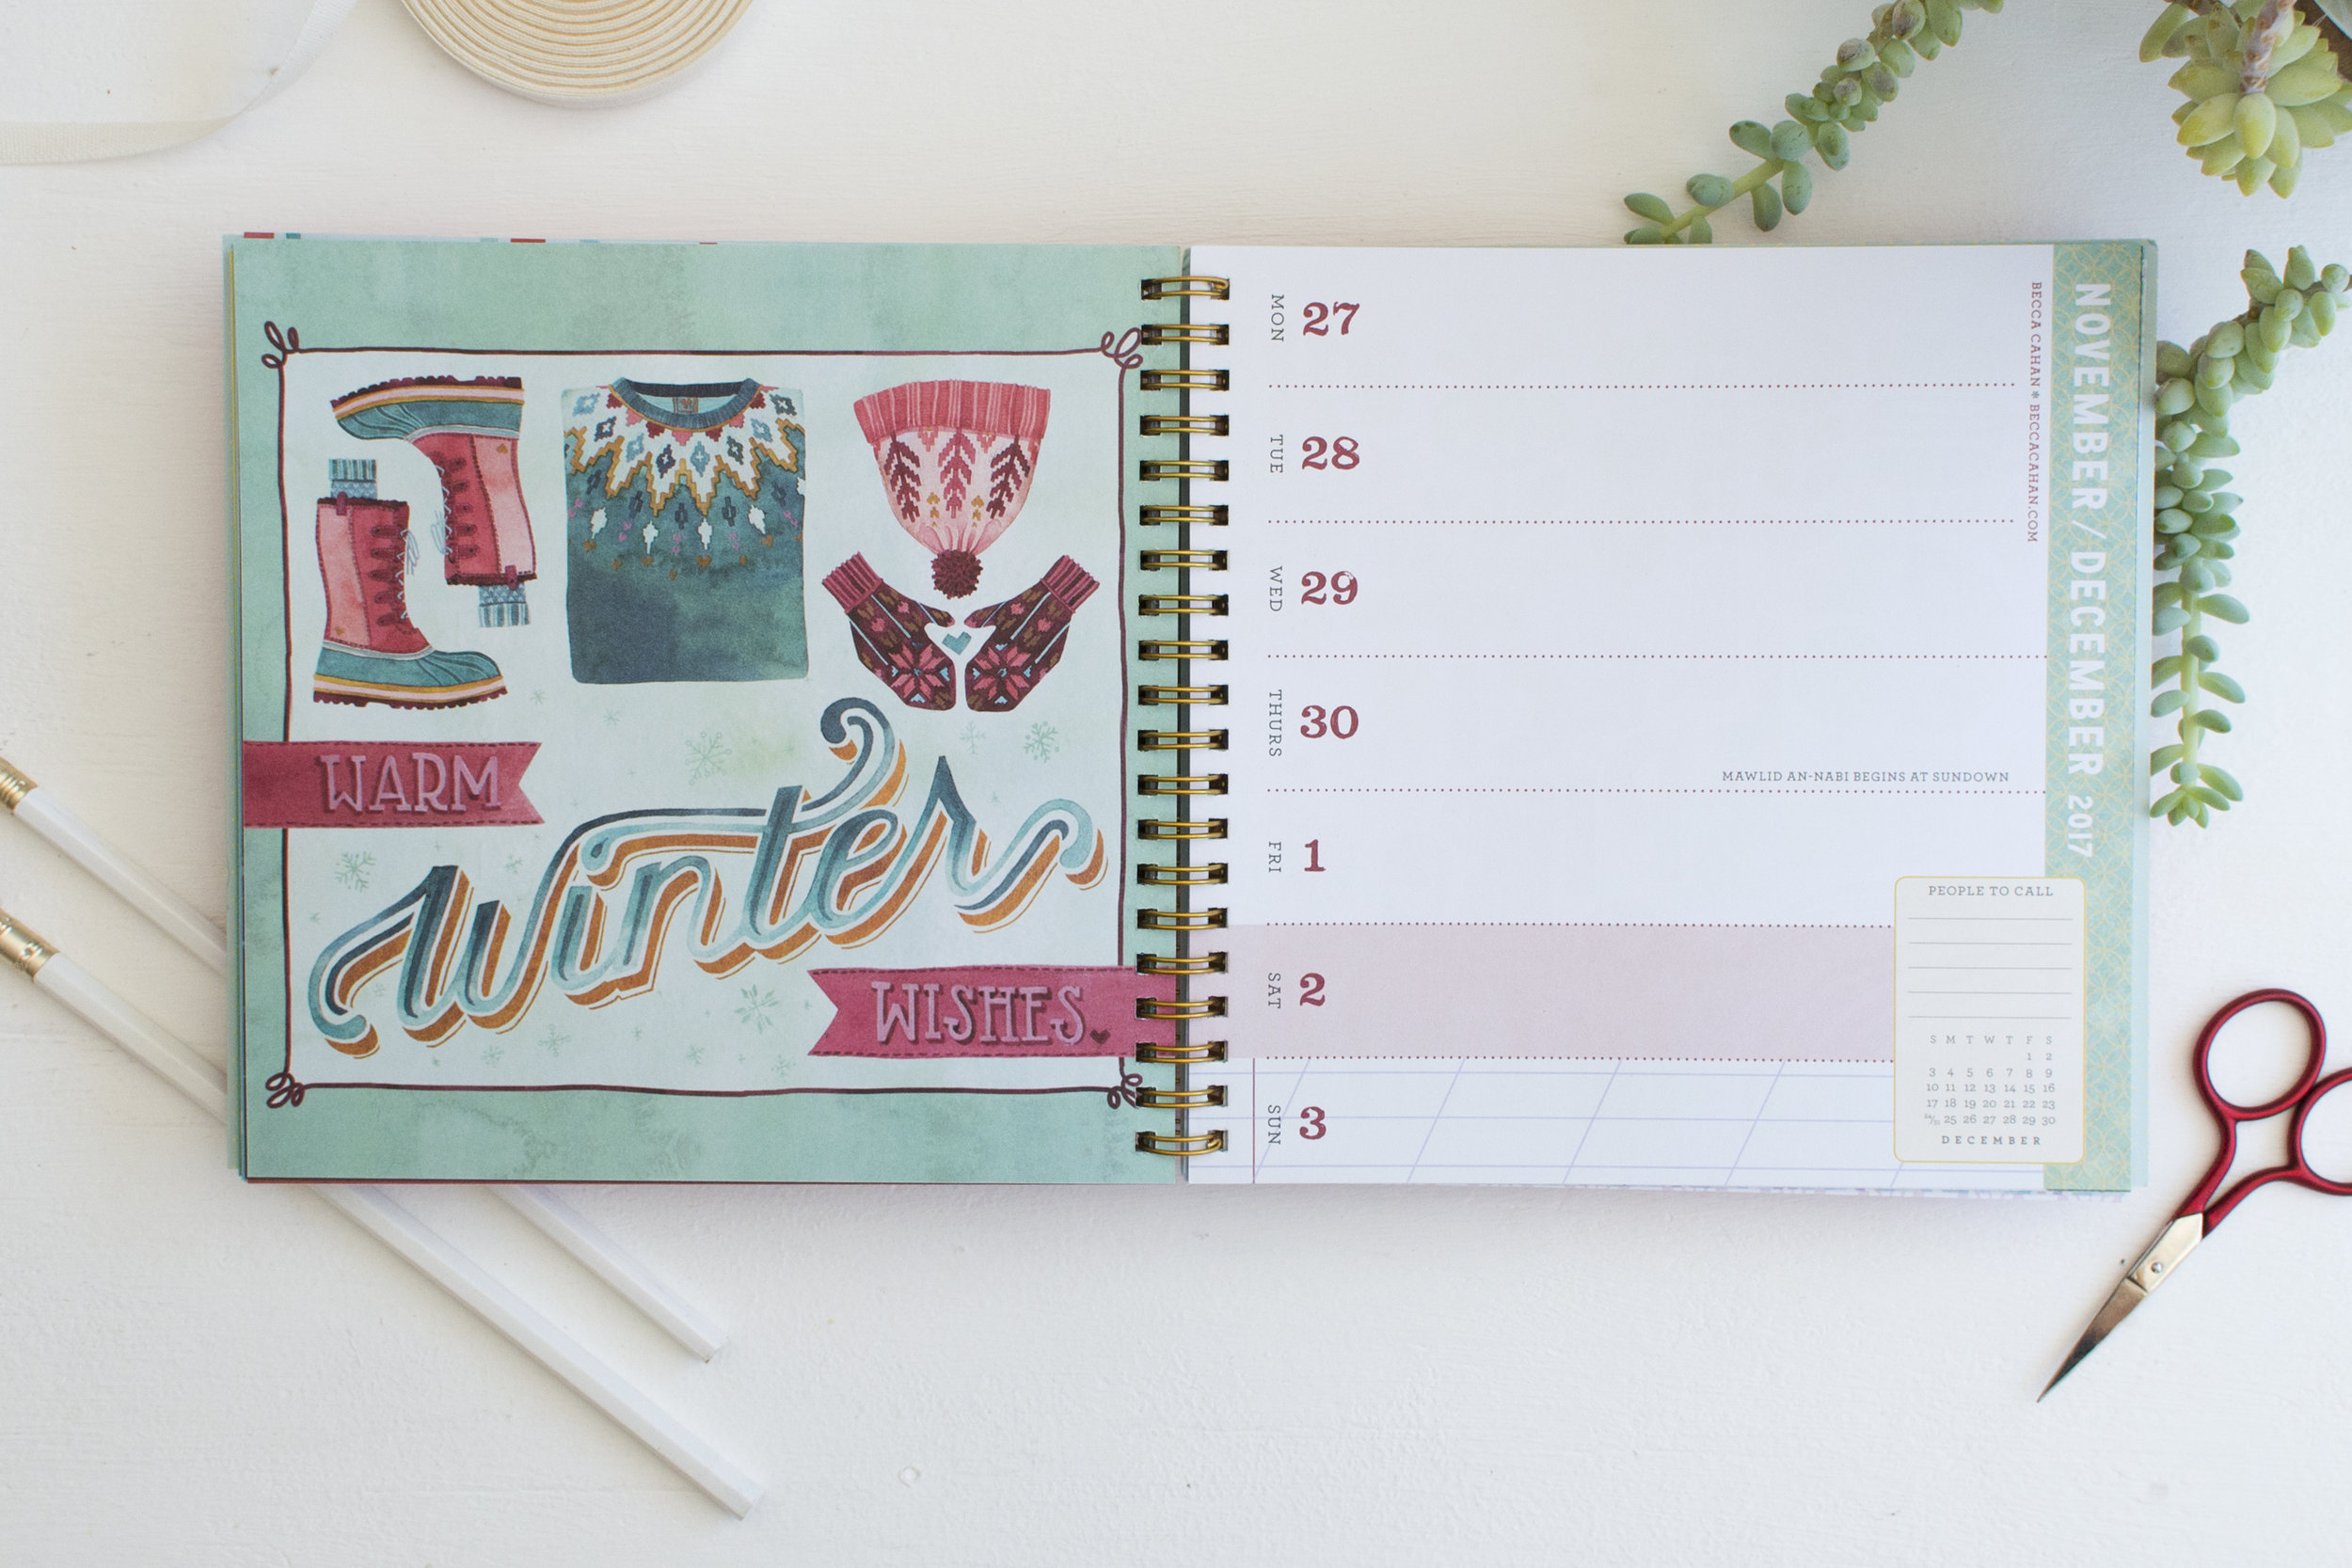 Workman Publishing 2017 Day Planner-Illustration and Photo by Becca Cahan